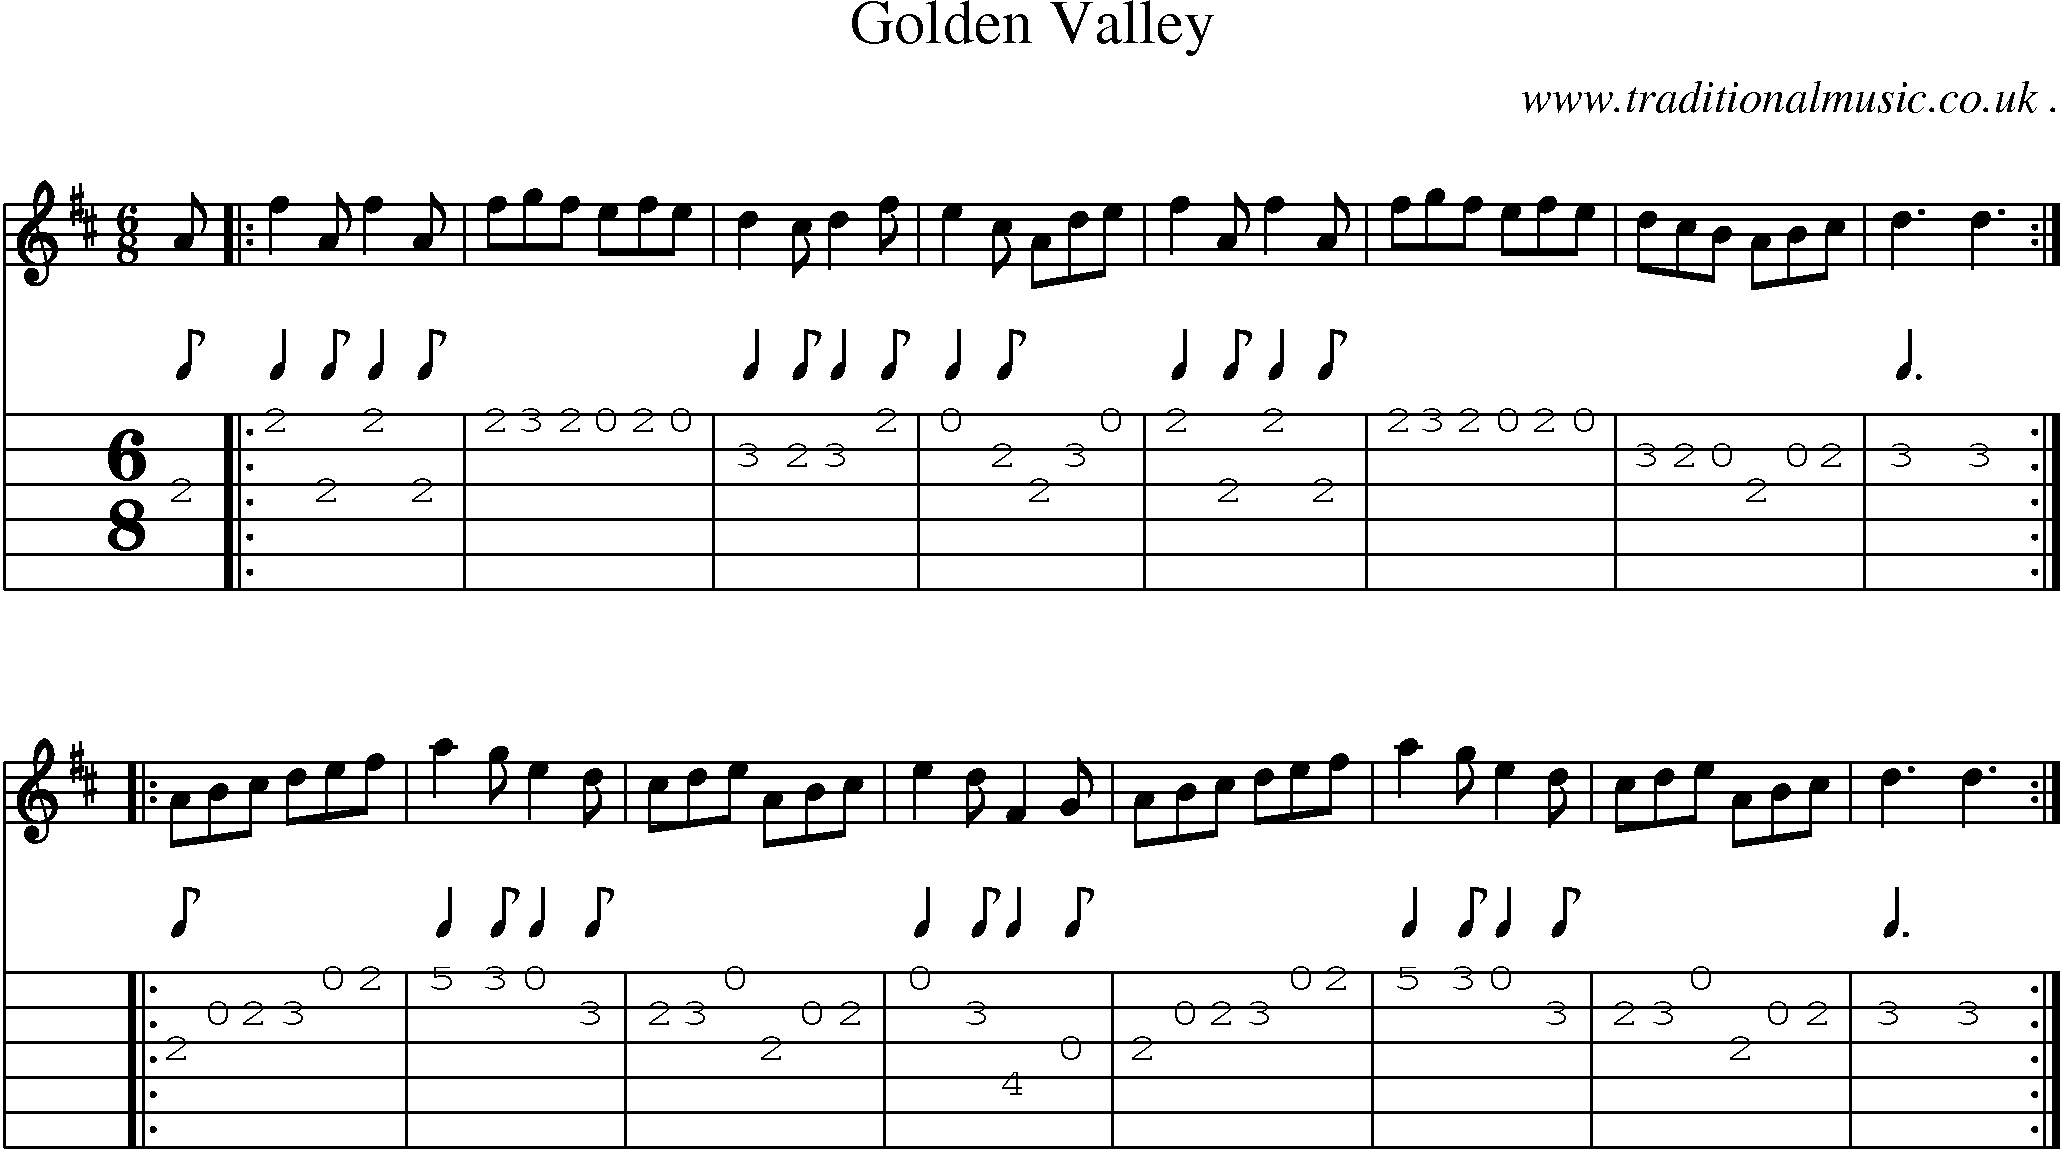 Music Score and Guitar Tabs for Golden Valley